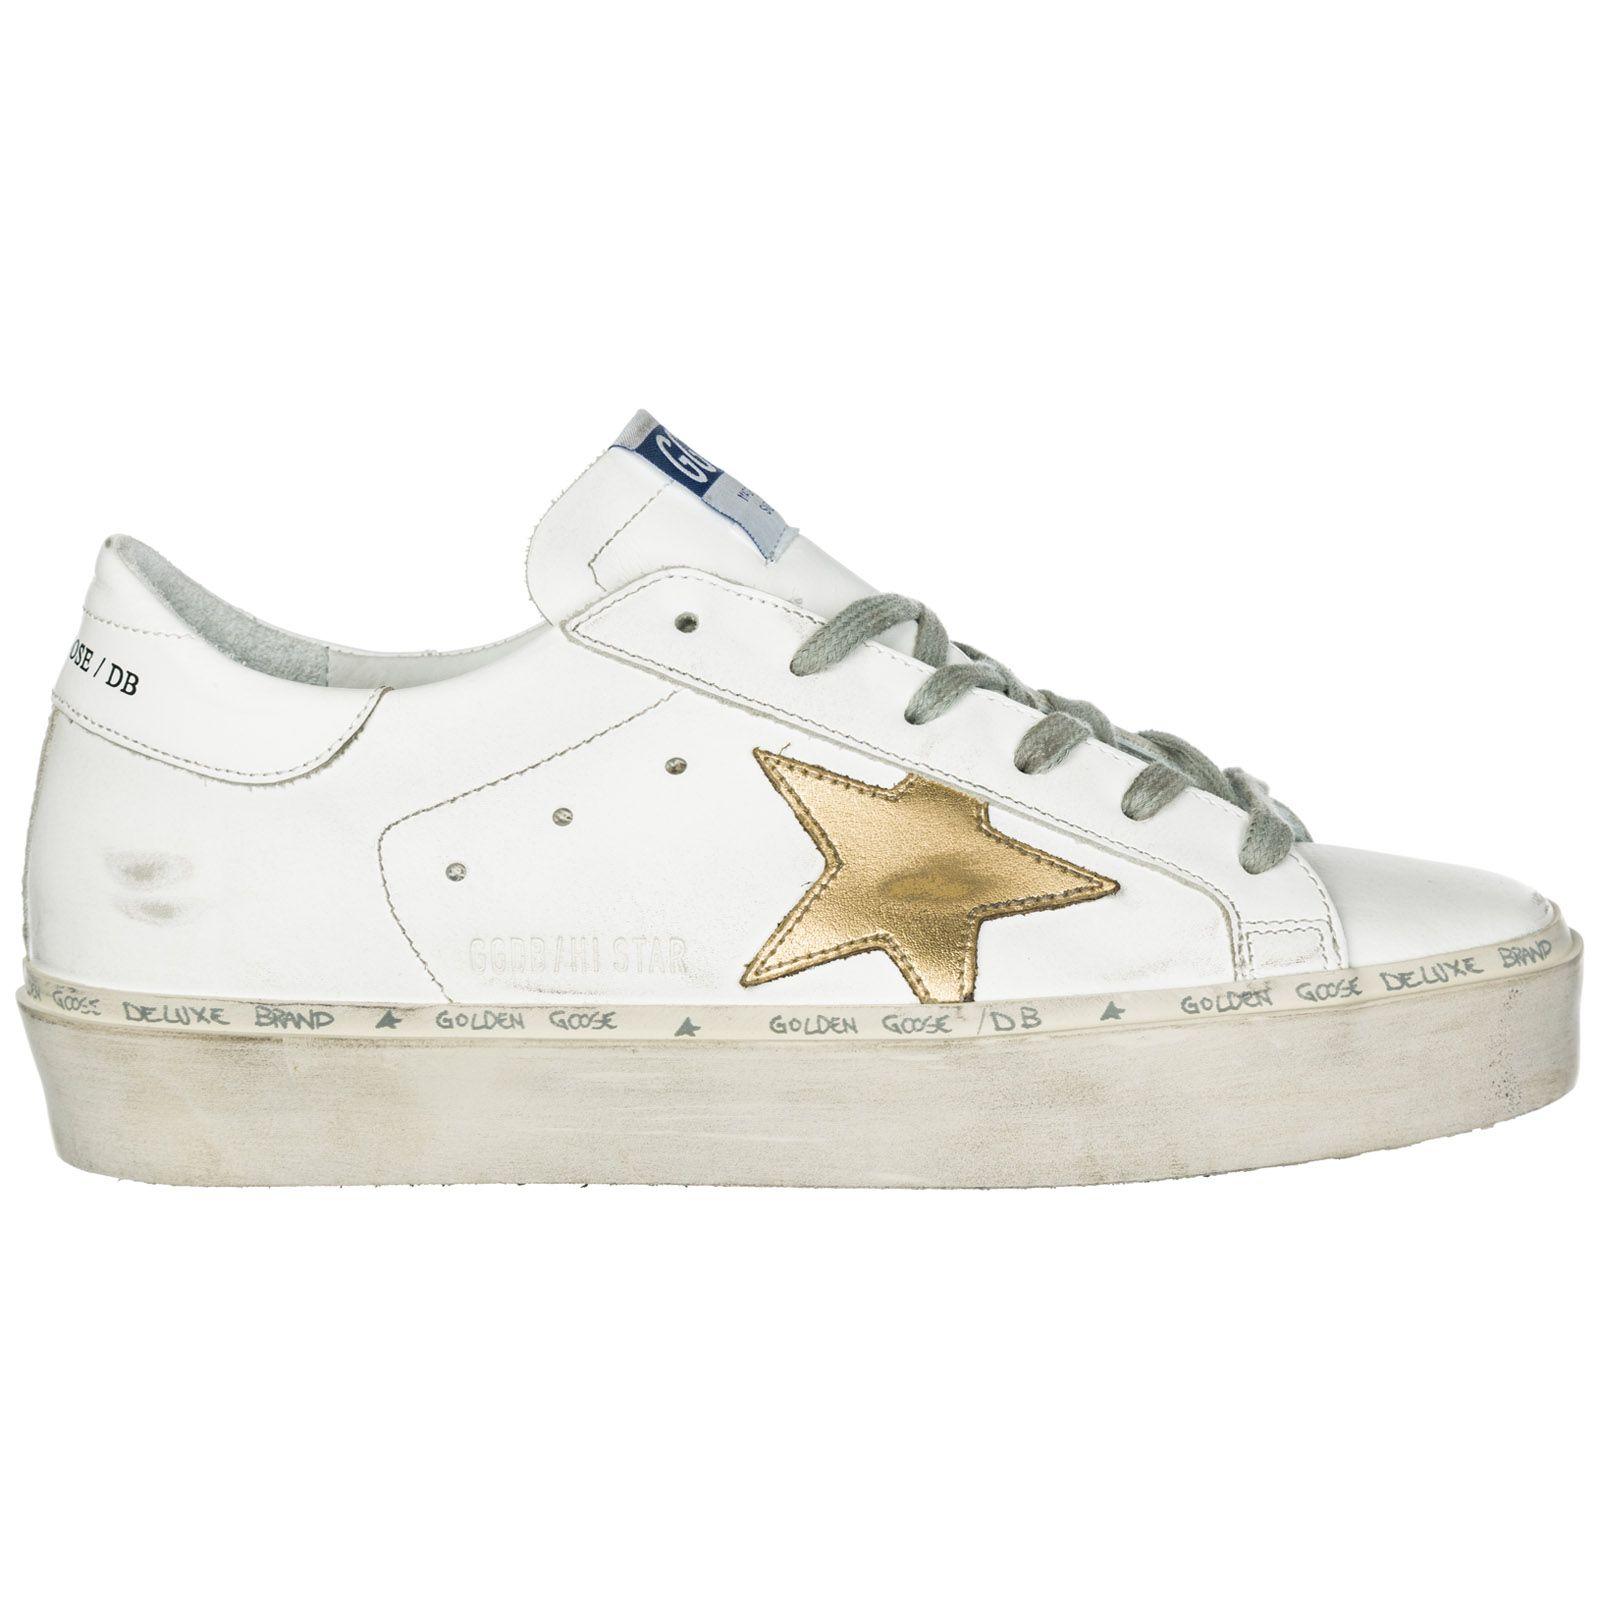 Golden Goose Deluxe Brand White Leather Sneakers in White - Lyst